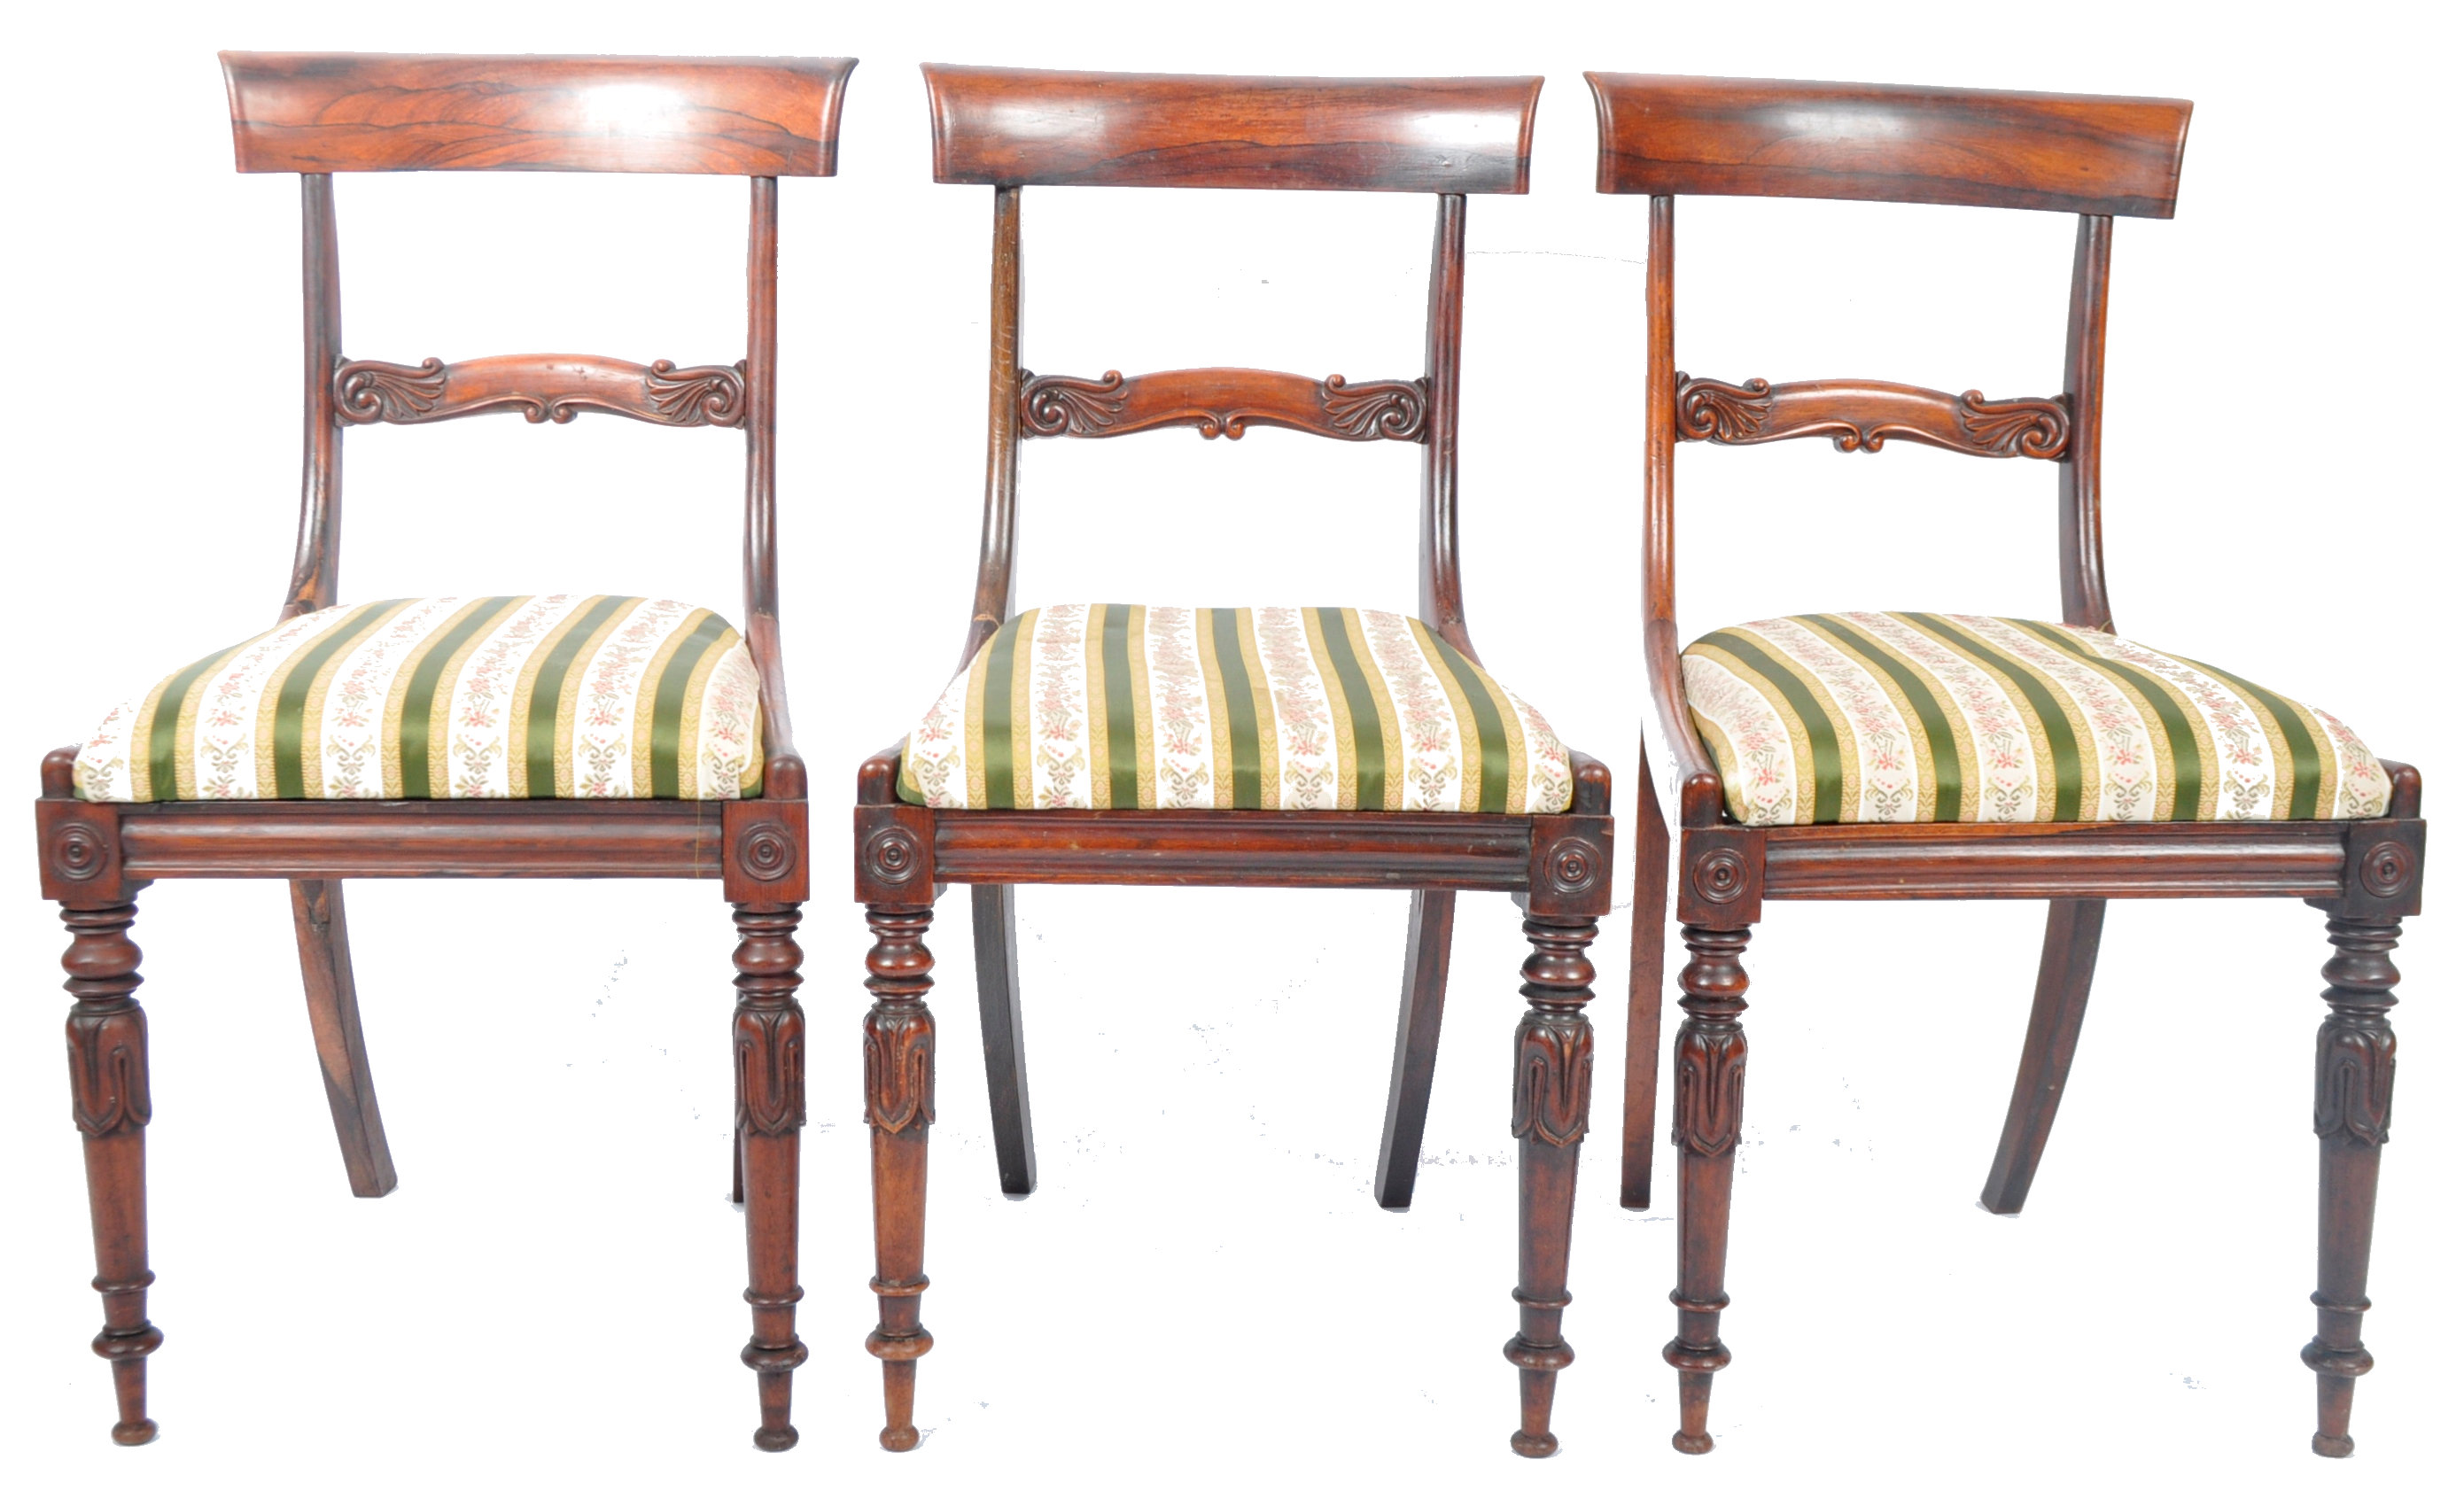 SIX 19TH CENTURY ROSEWOOD DINING CHAIRS IN THE GILLOWS MANNER - Image 11 of 11